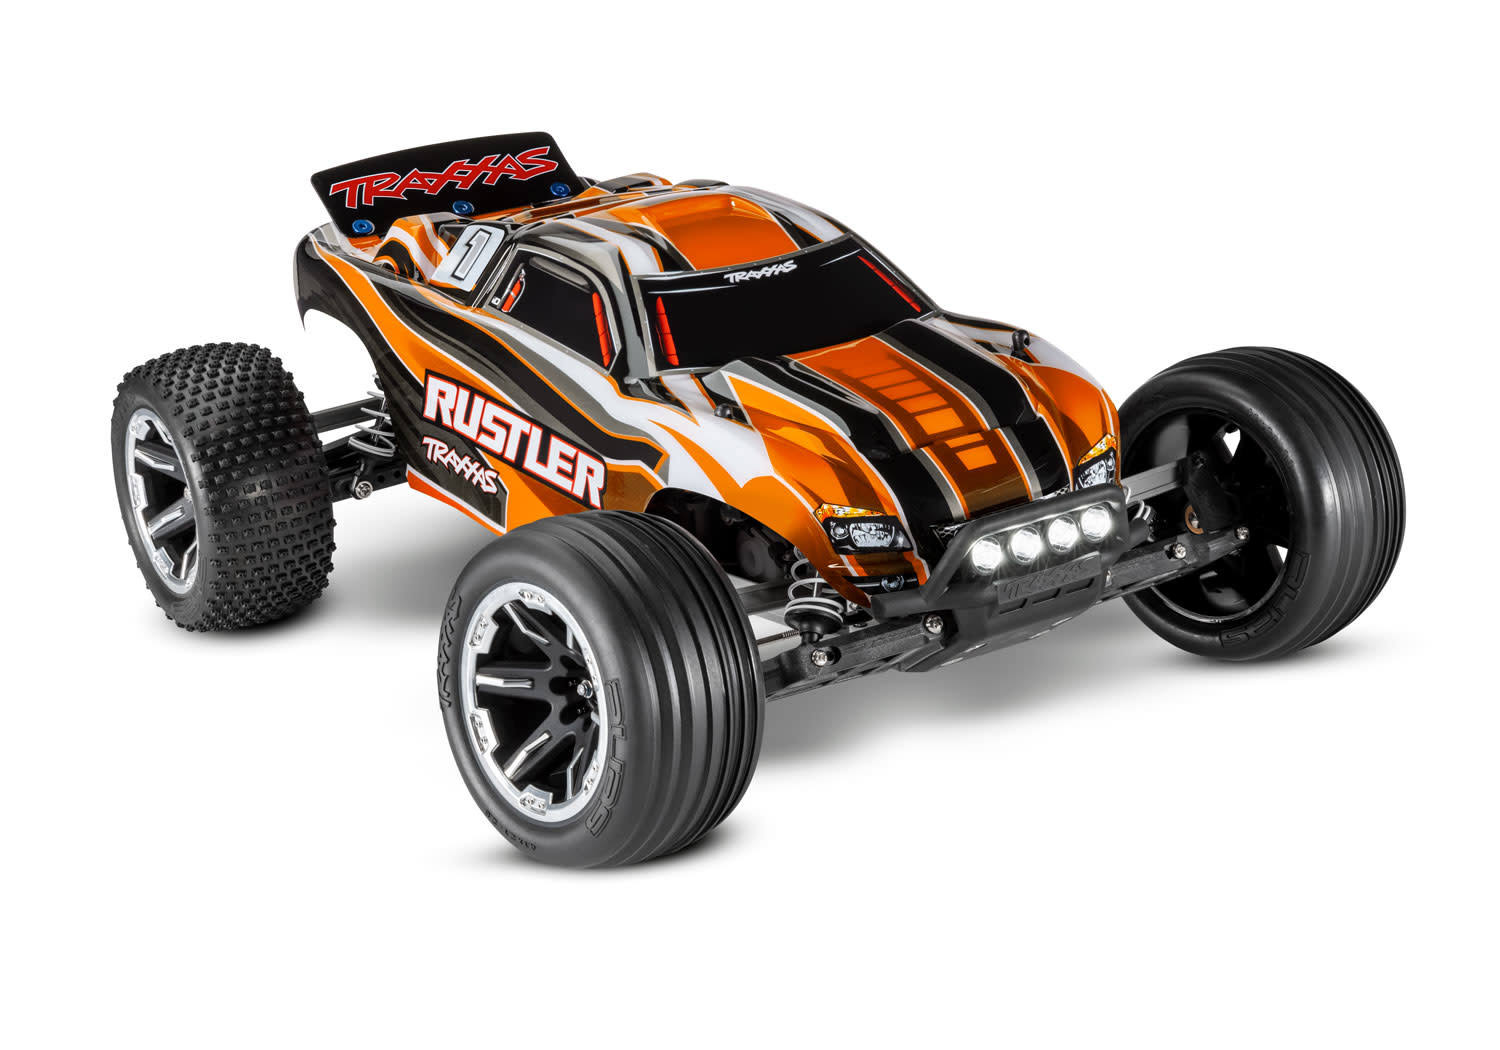 Traxxas - Rustler RTR 2WD RC Truck with LED Lights with Battery & Charger - Orange - XL-5 1/10 Scale (37054-61-ORNG)